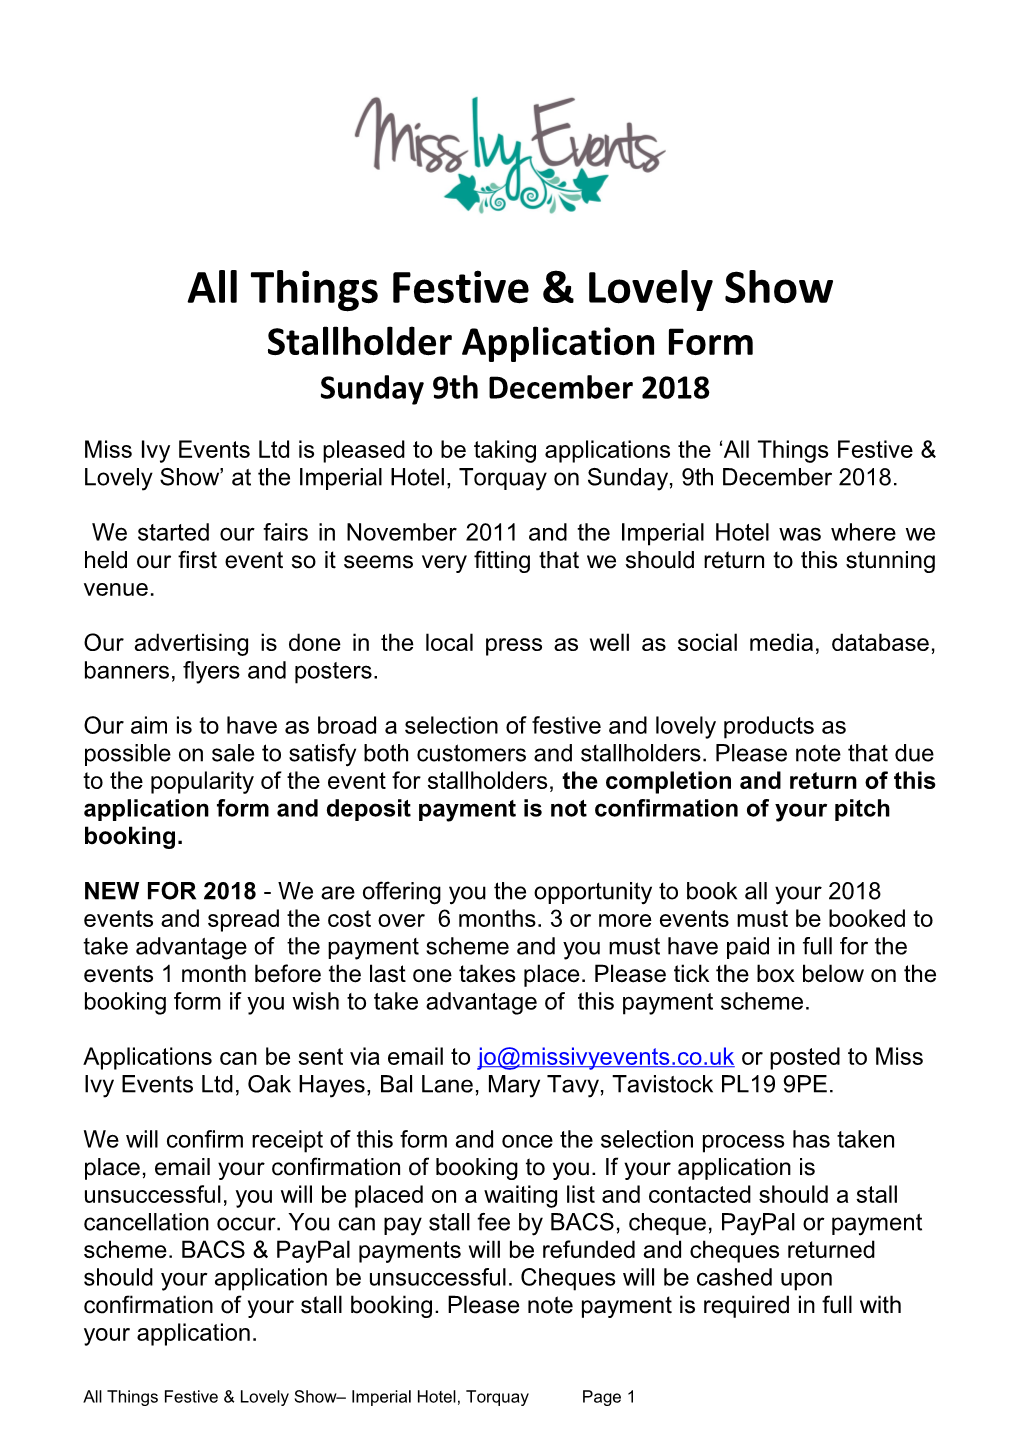 All Things Festive & Lovely Show